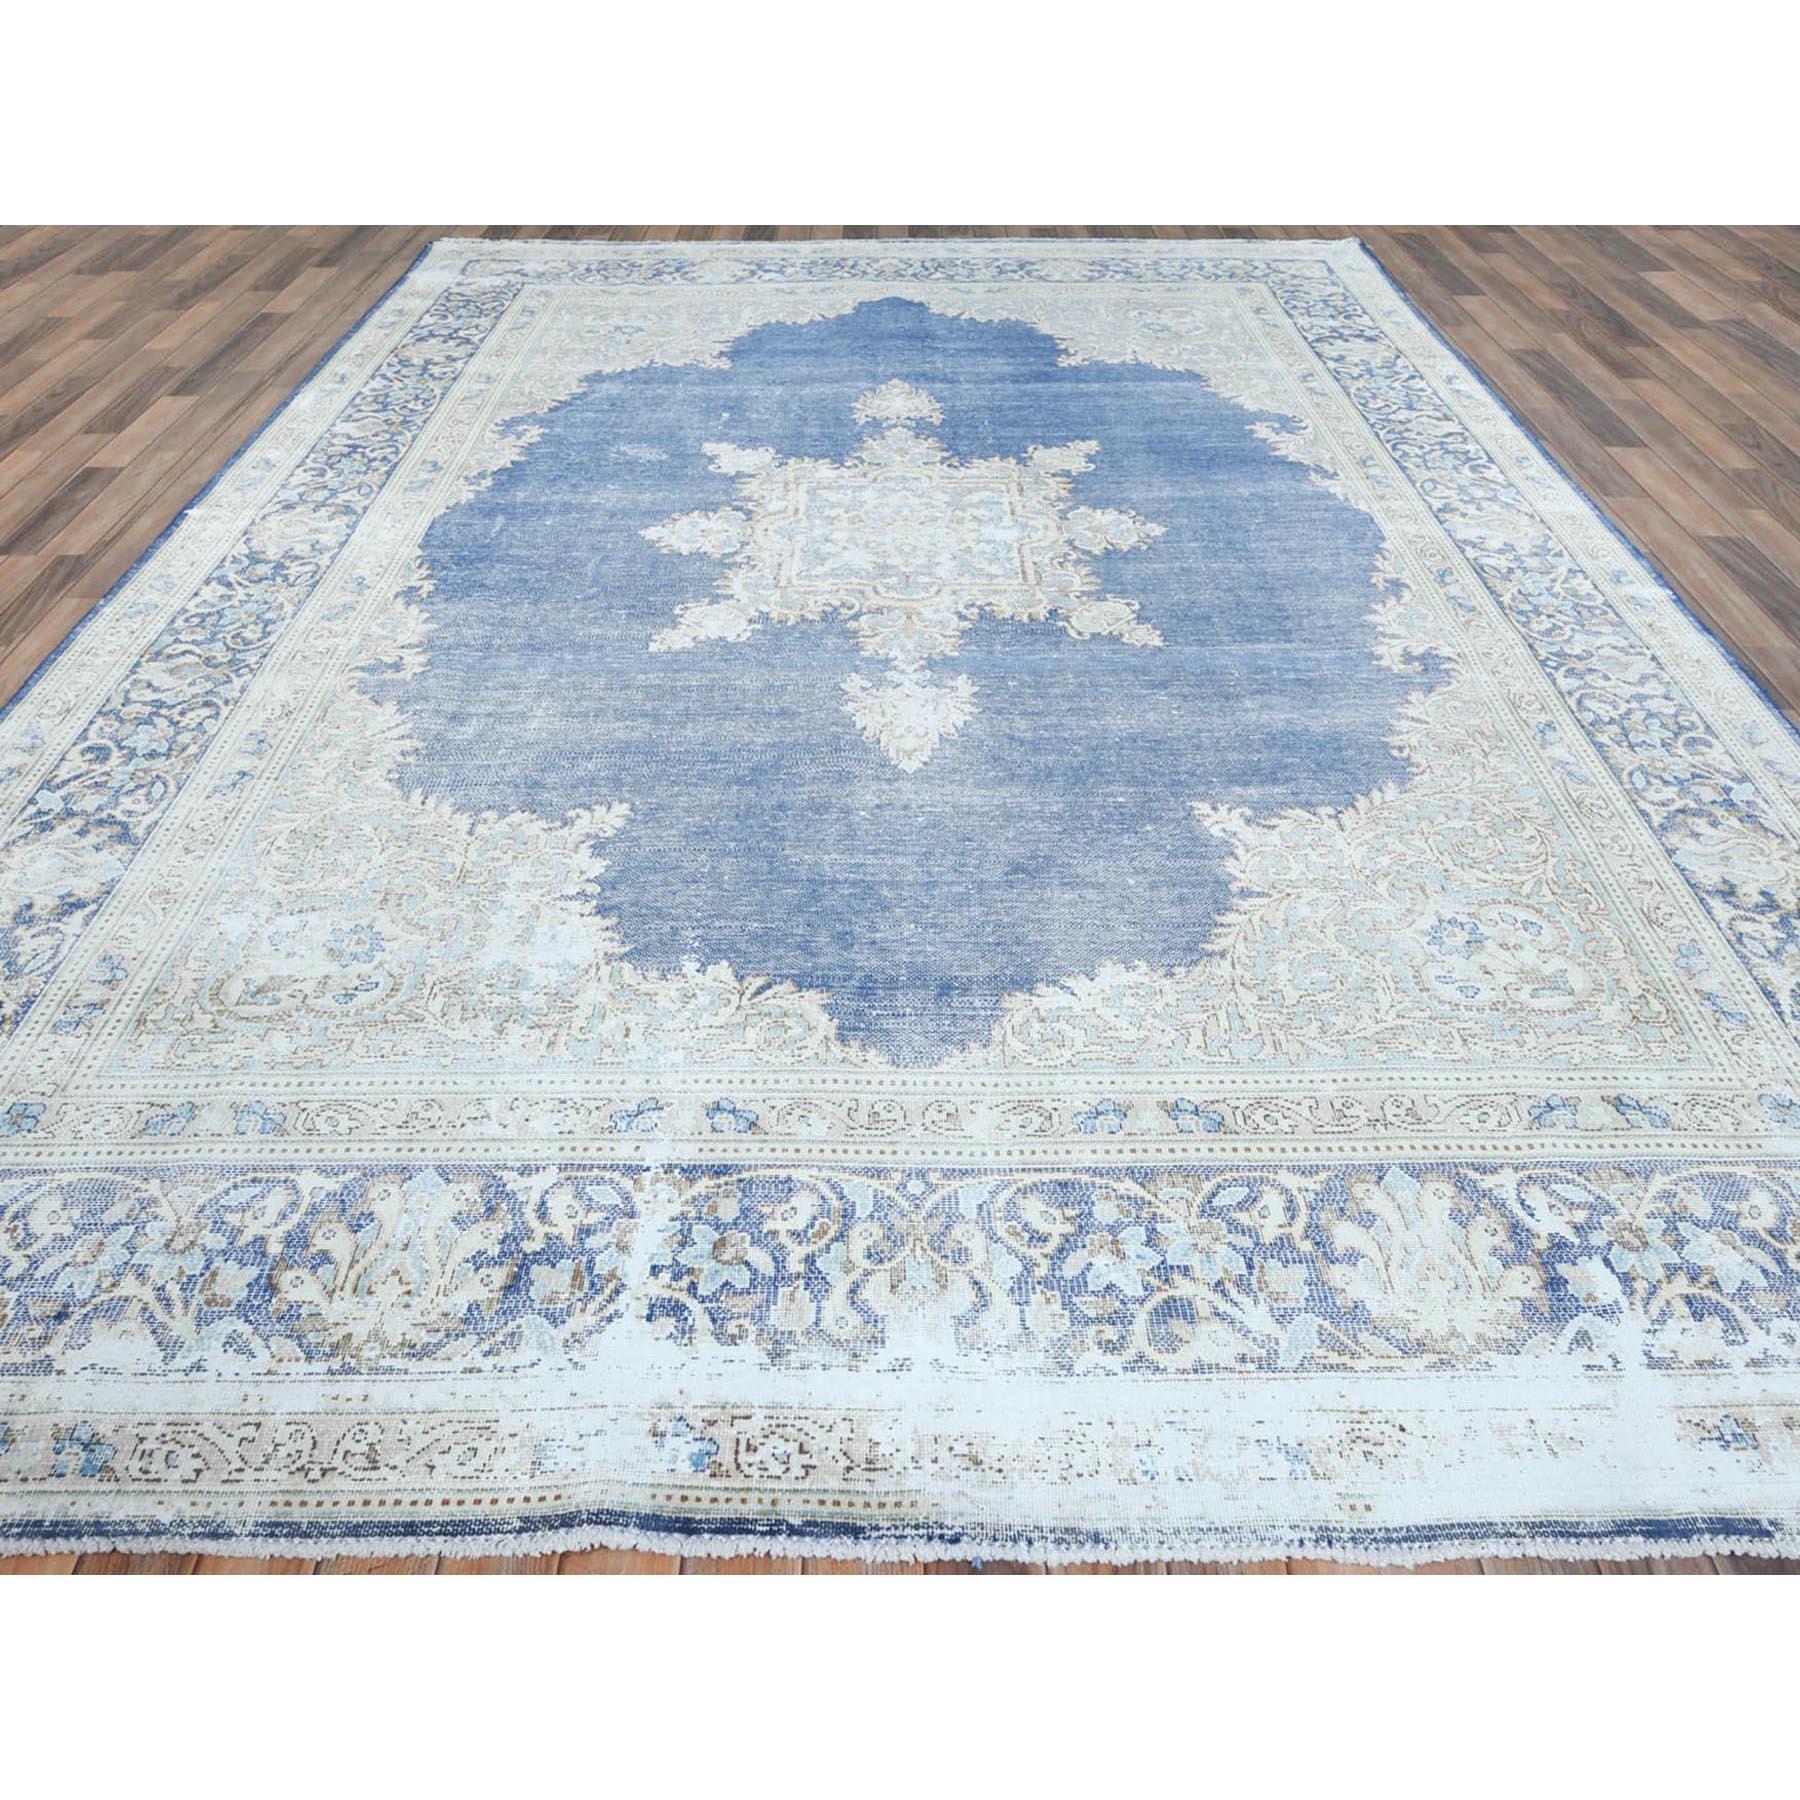 Medieval Navy Blue Worn Wool Cropped Thin Hand Knotted Old Persian Kerman Distressed Rug For Sale